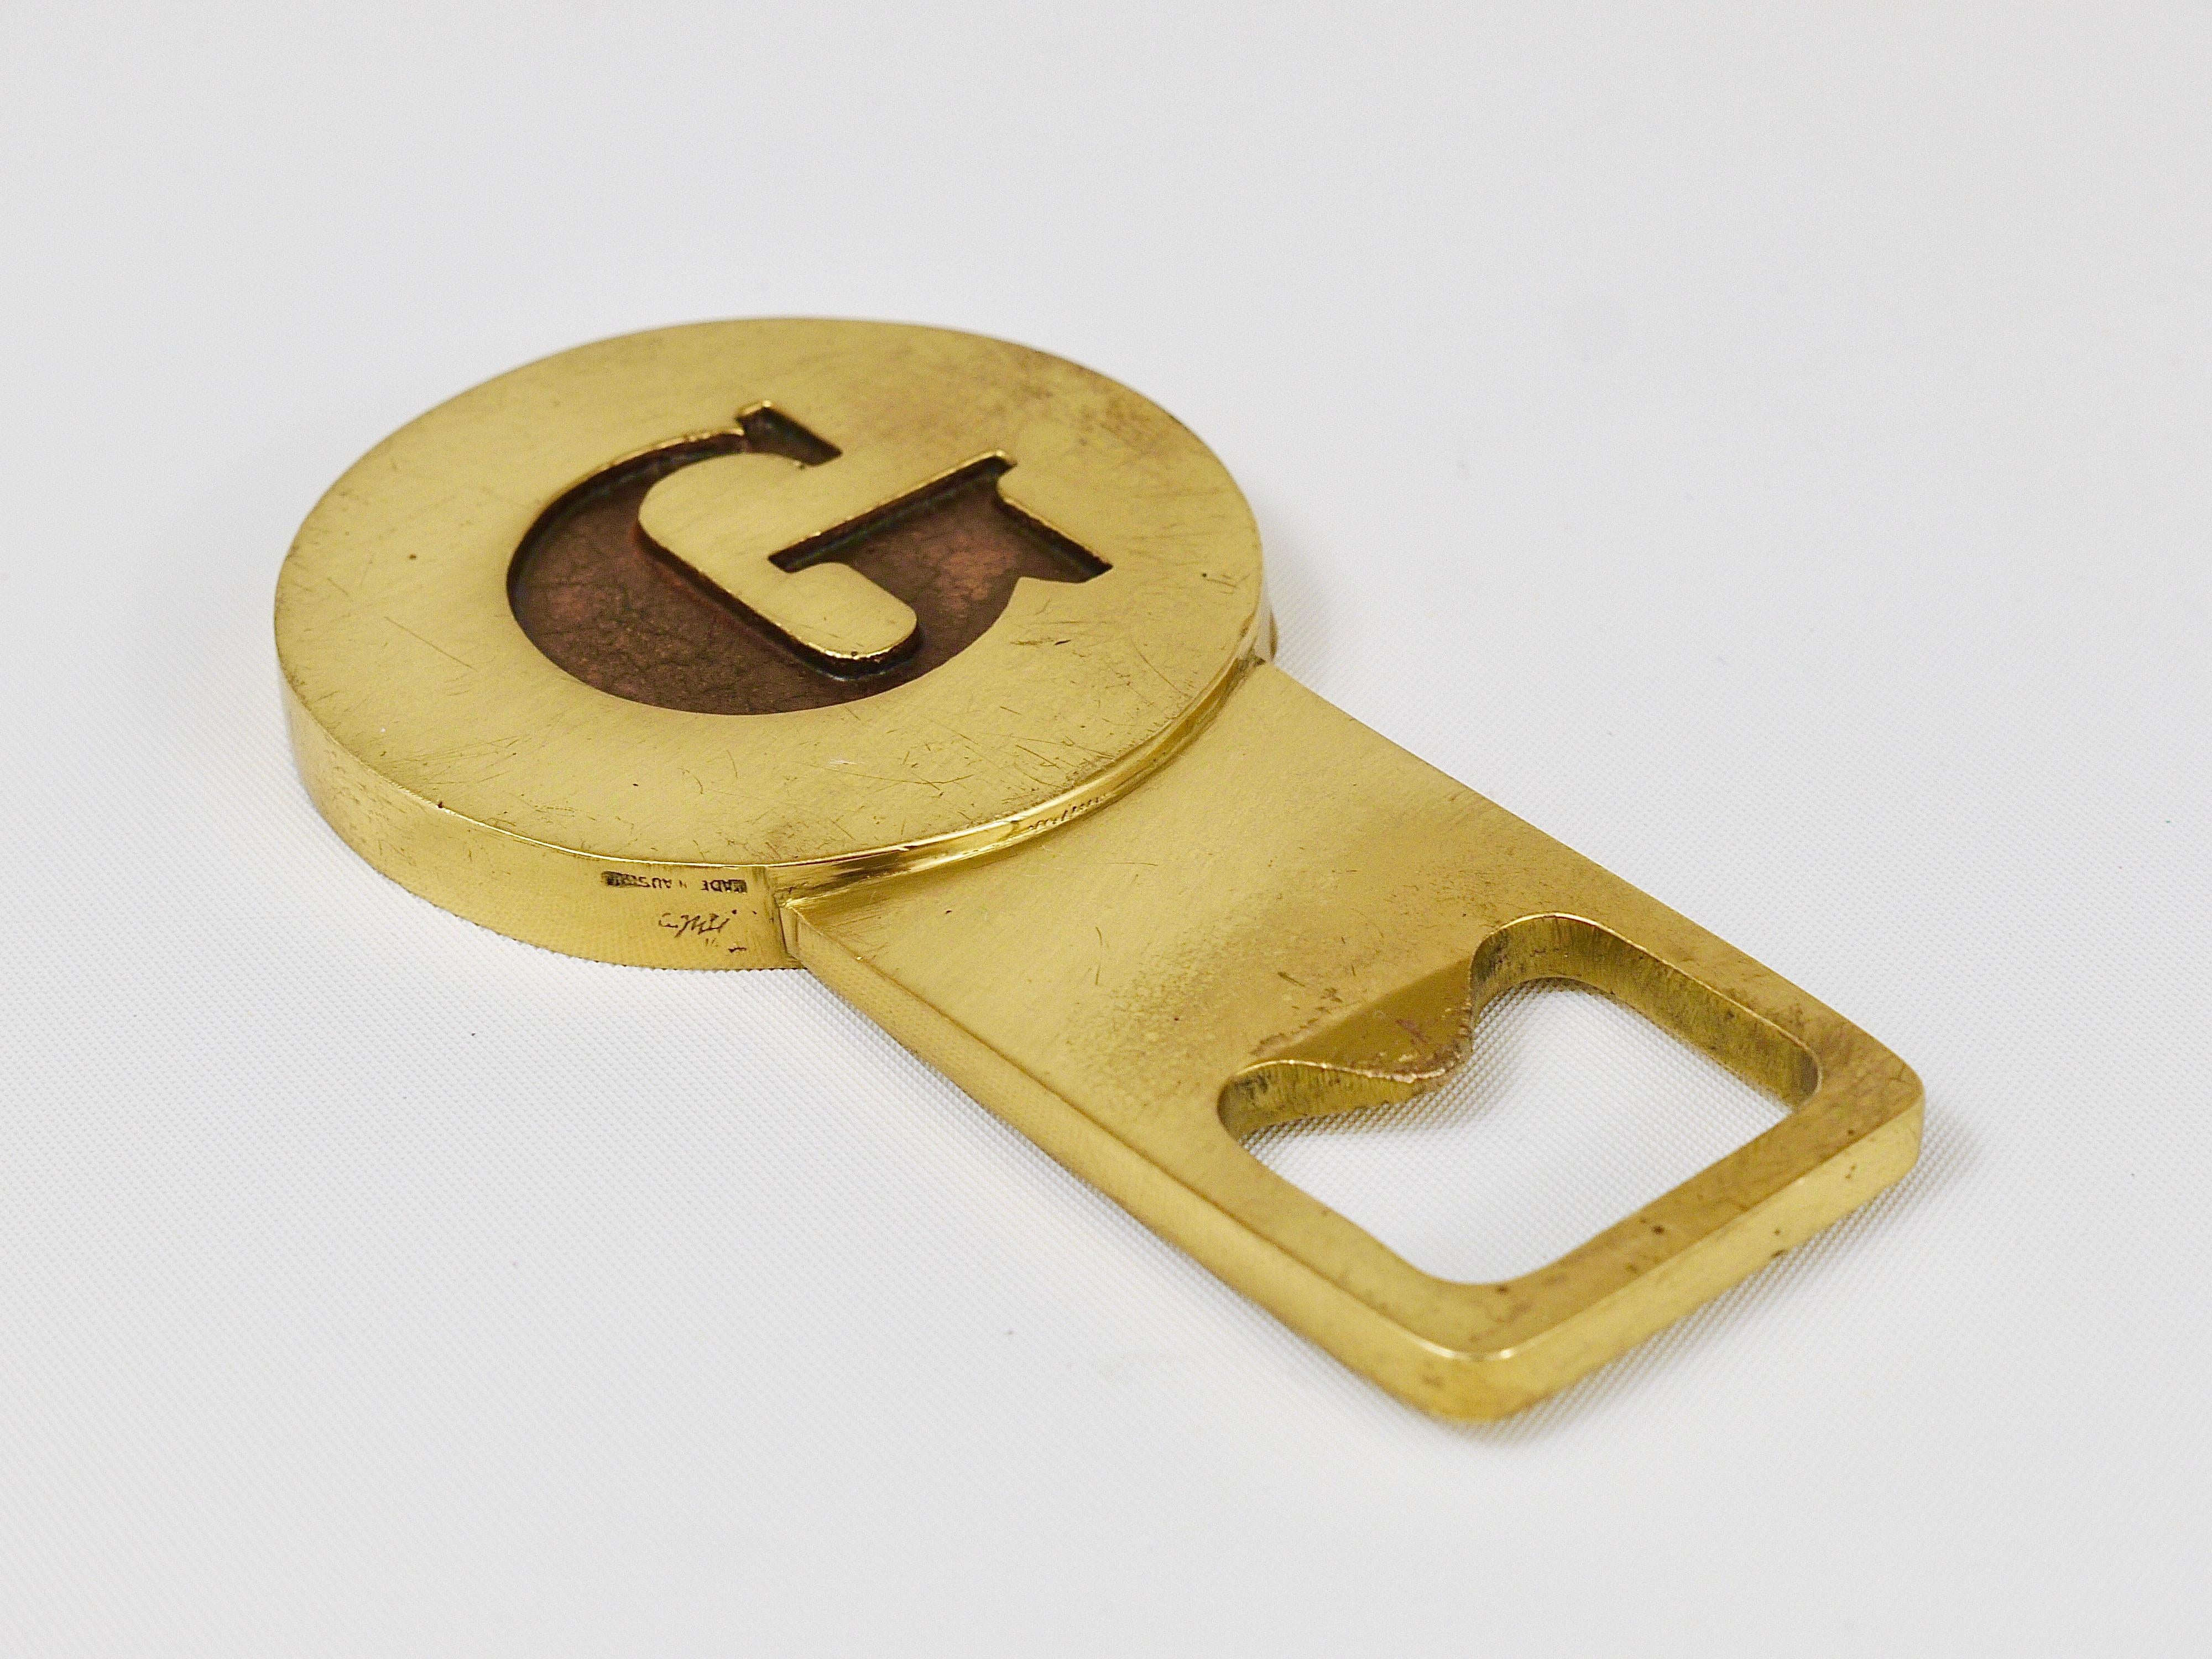 A beautiful modernist bottle opener, displaying the letter G, made of solid brass. Designed and executed in the 1960s by Carl Auböck, Austria. In good condition with patina. Marked.